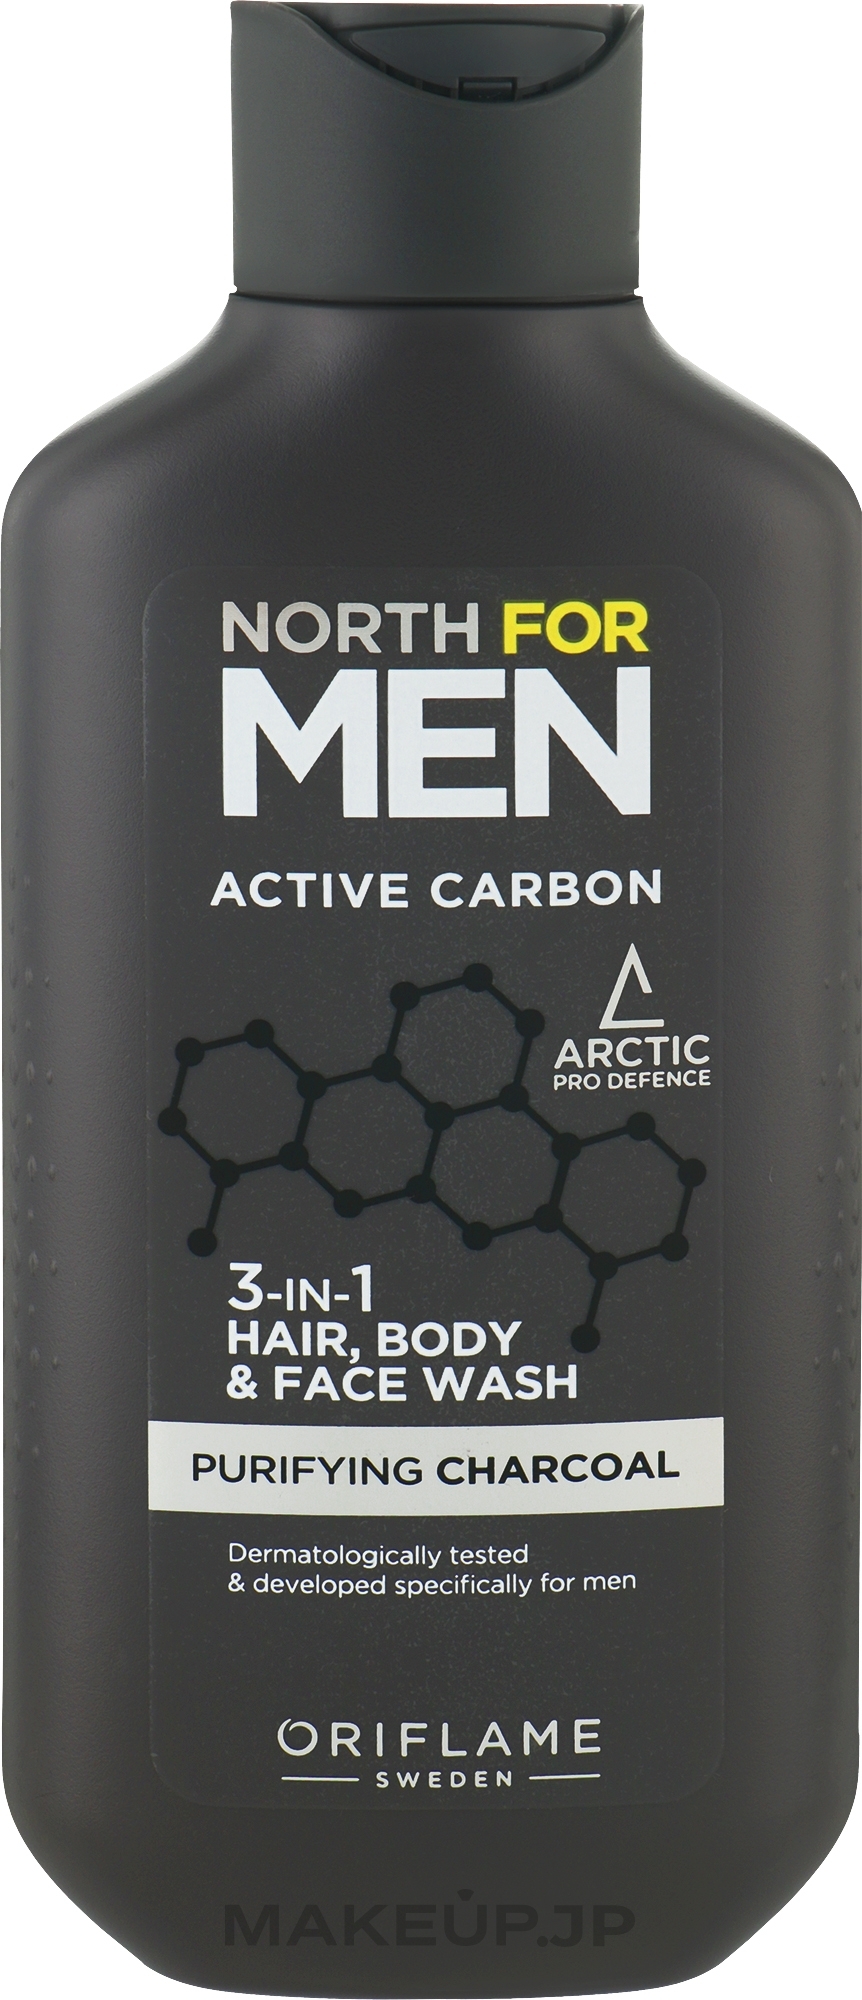 3in1 Shampoo & Shower Gel - Oriflame North For Men Active Carbon 3in1 Hair, Body & Face Wash — photo 250 ml